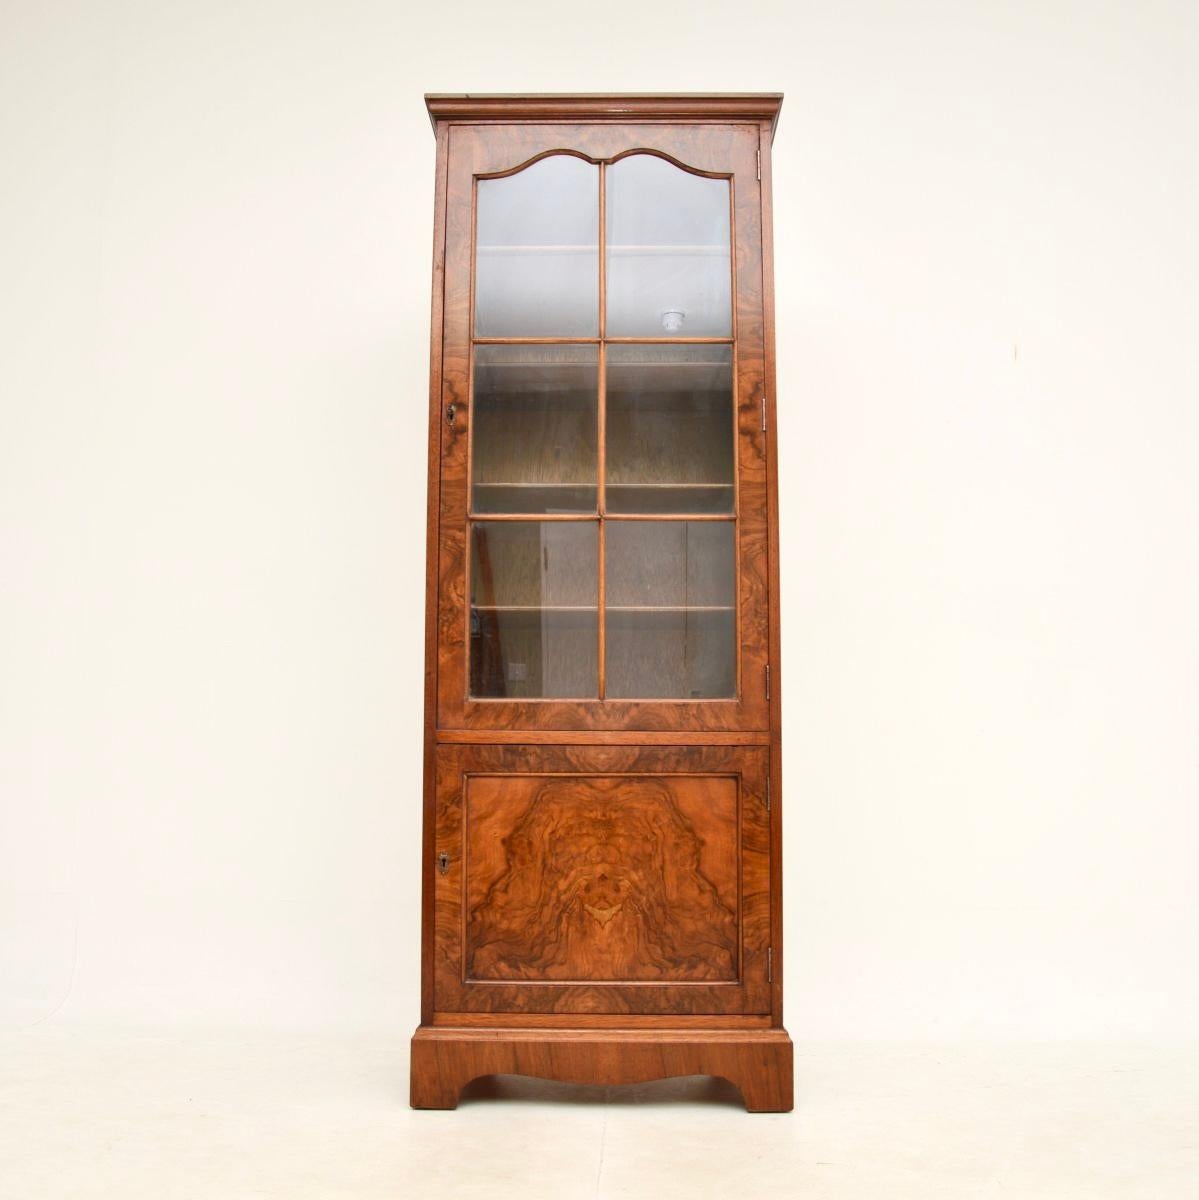 A lovely antique burr walnut bookcase in the Georgian style. This was made in England, it dates from around the 1930’s.

It is of very good quality and has lovely proportions; it is tall and slim, with lots of storage space. This has stunning burr